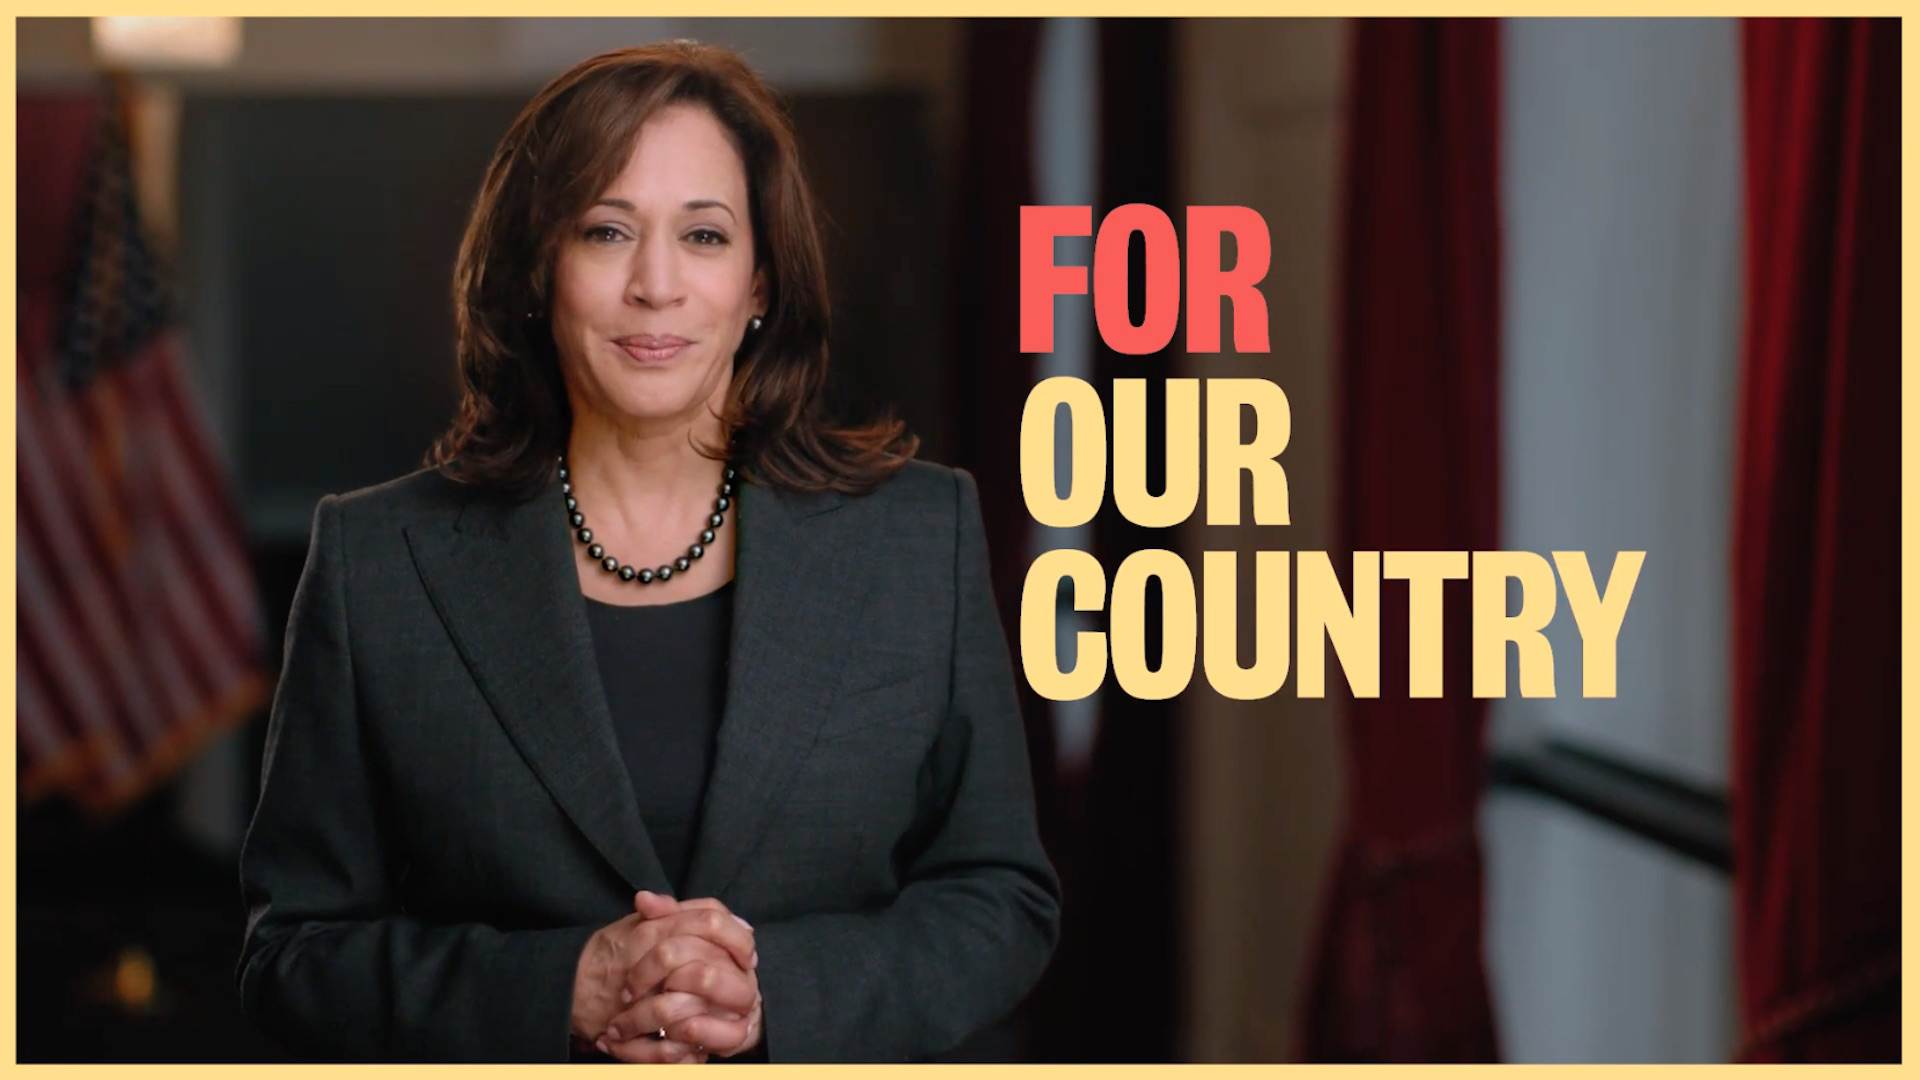 Vice President Kamala Harris Is Standing With Words For Our Country On Side 2K Kamala Harris